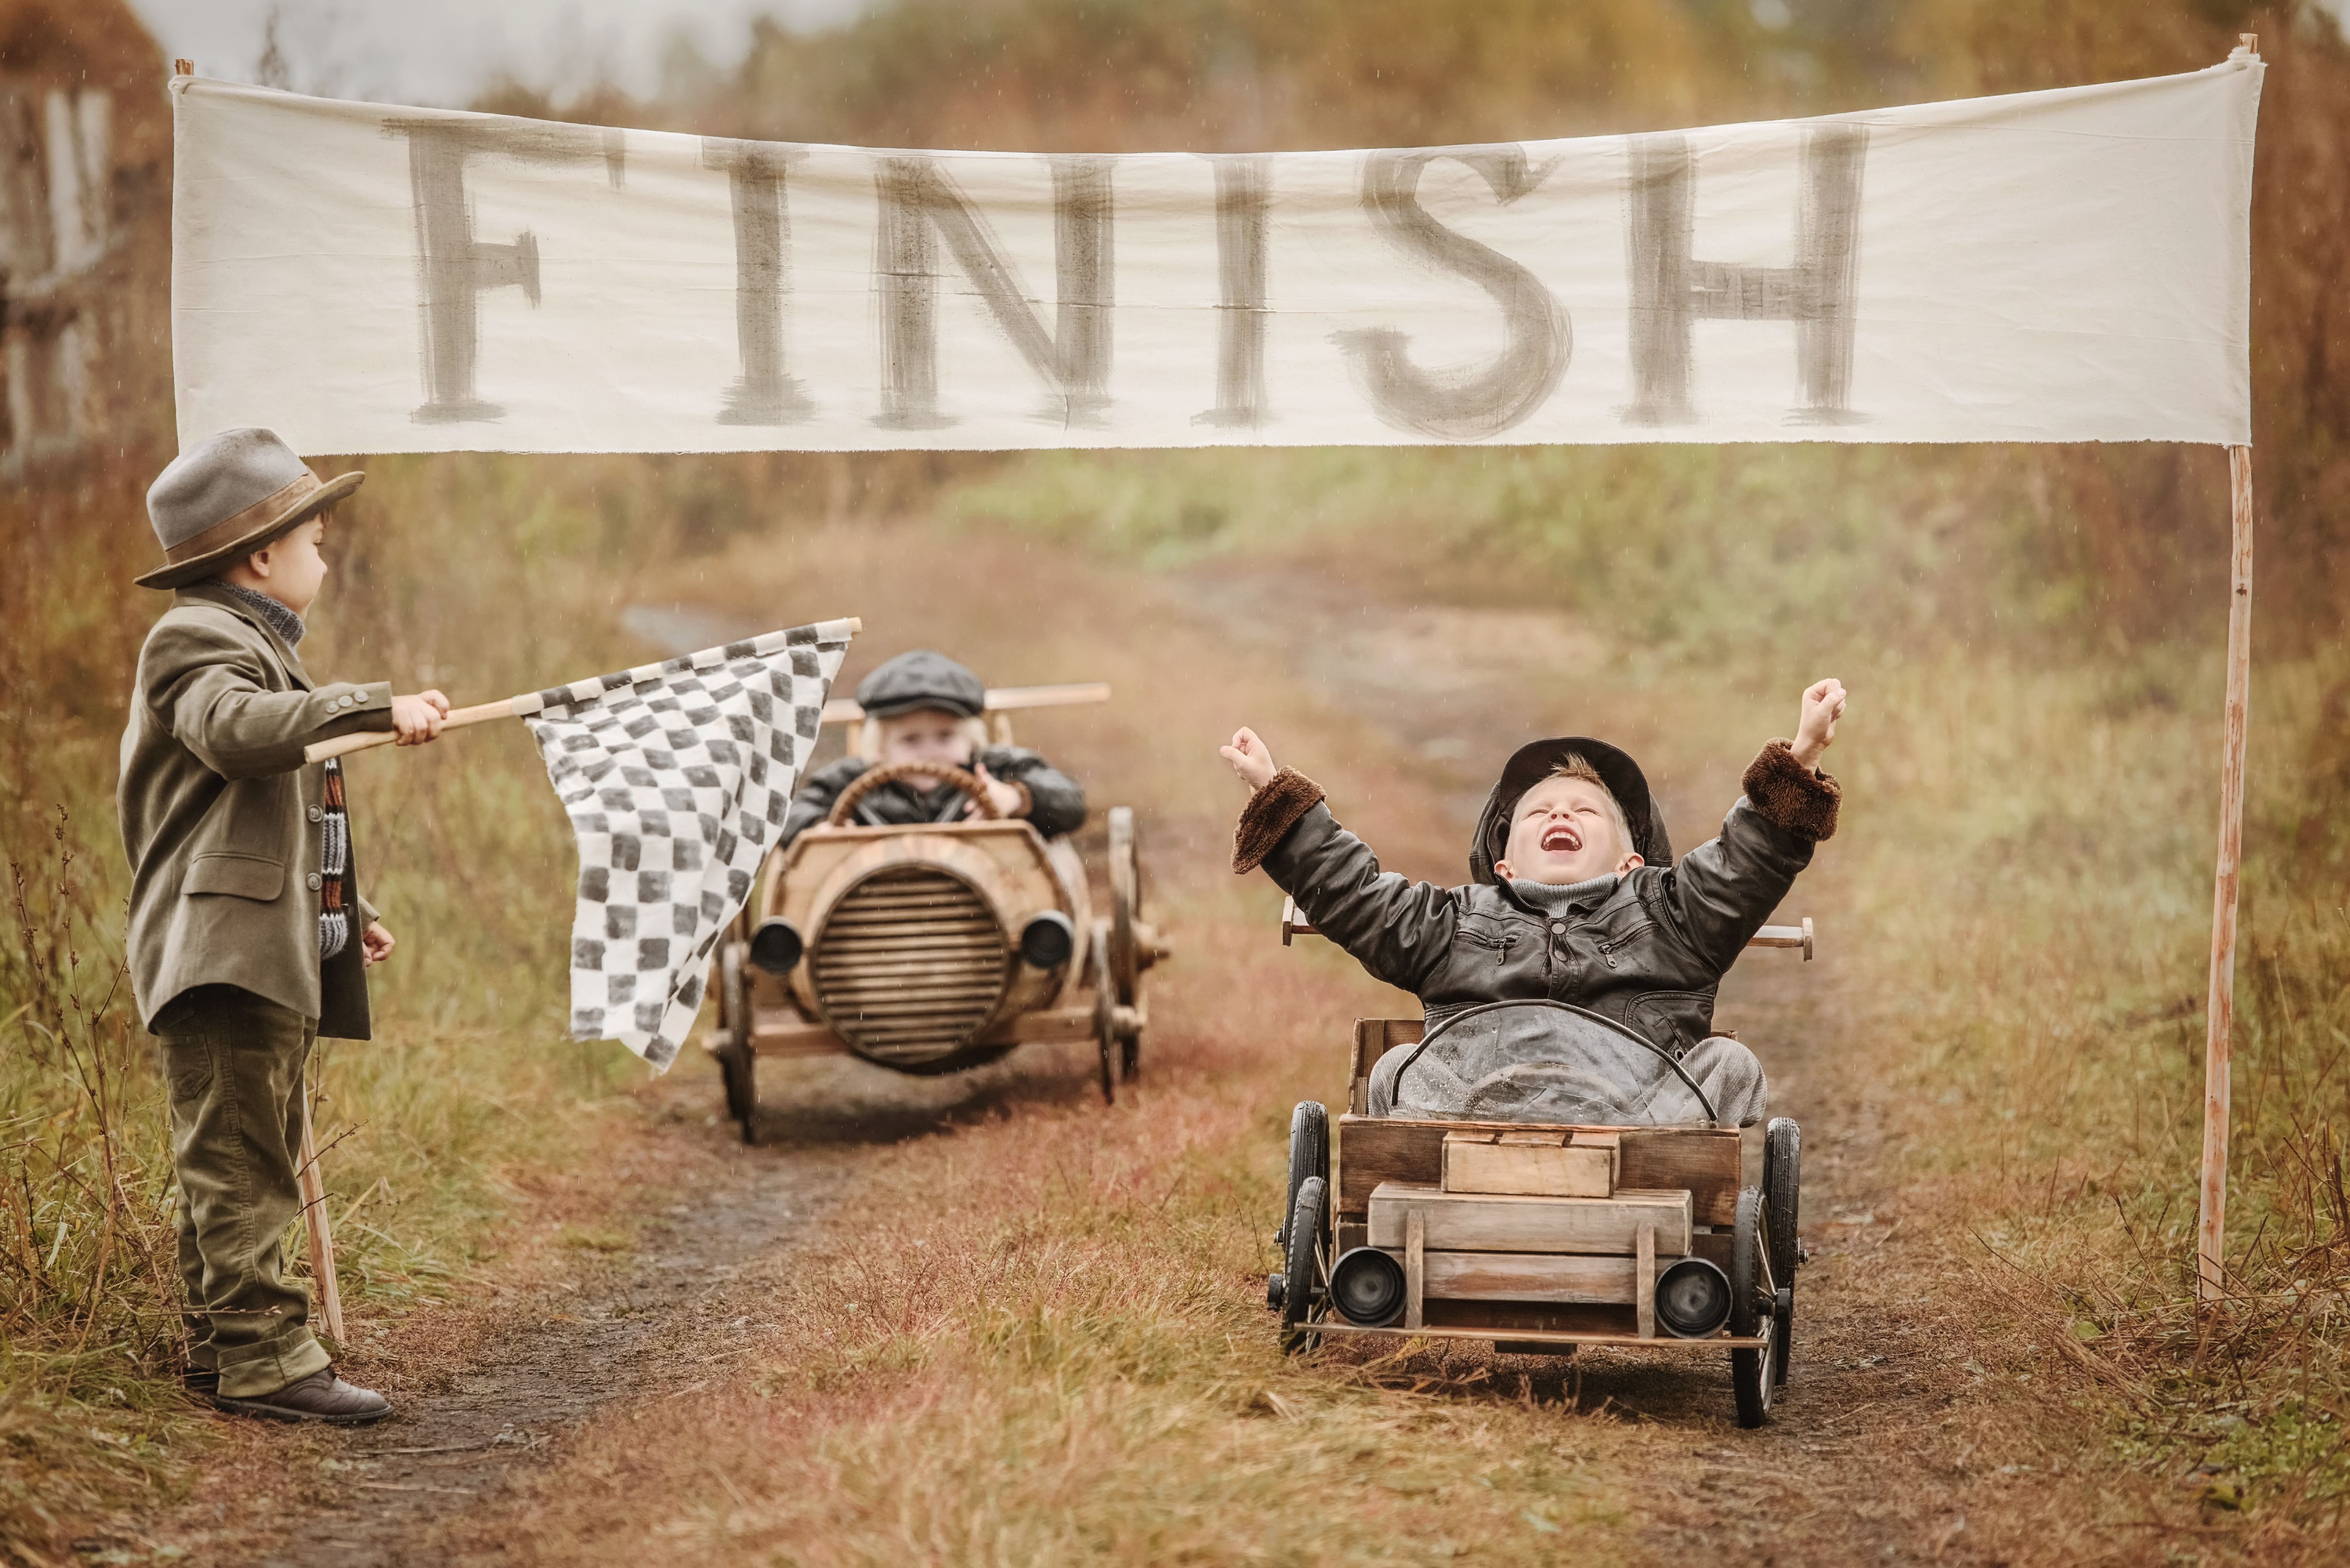 Boys finish a race with self-made cars